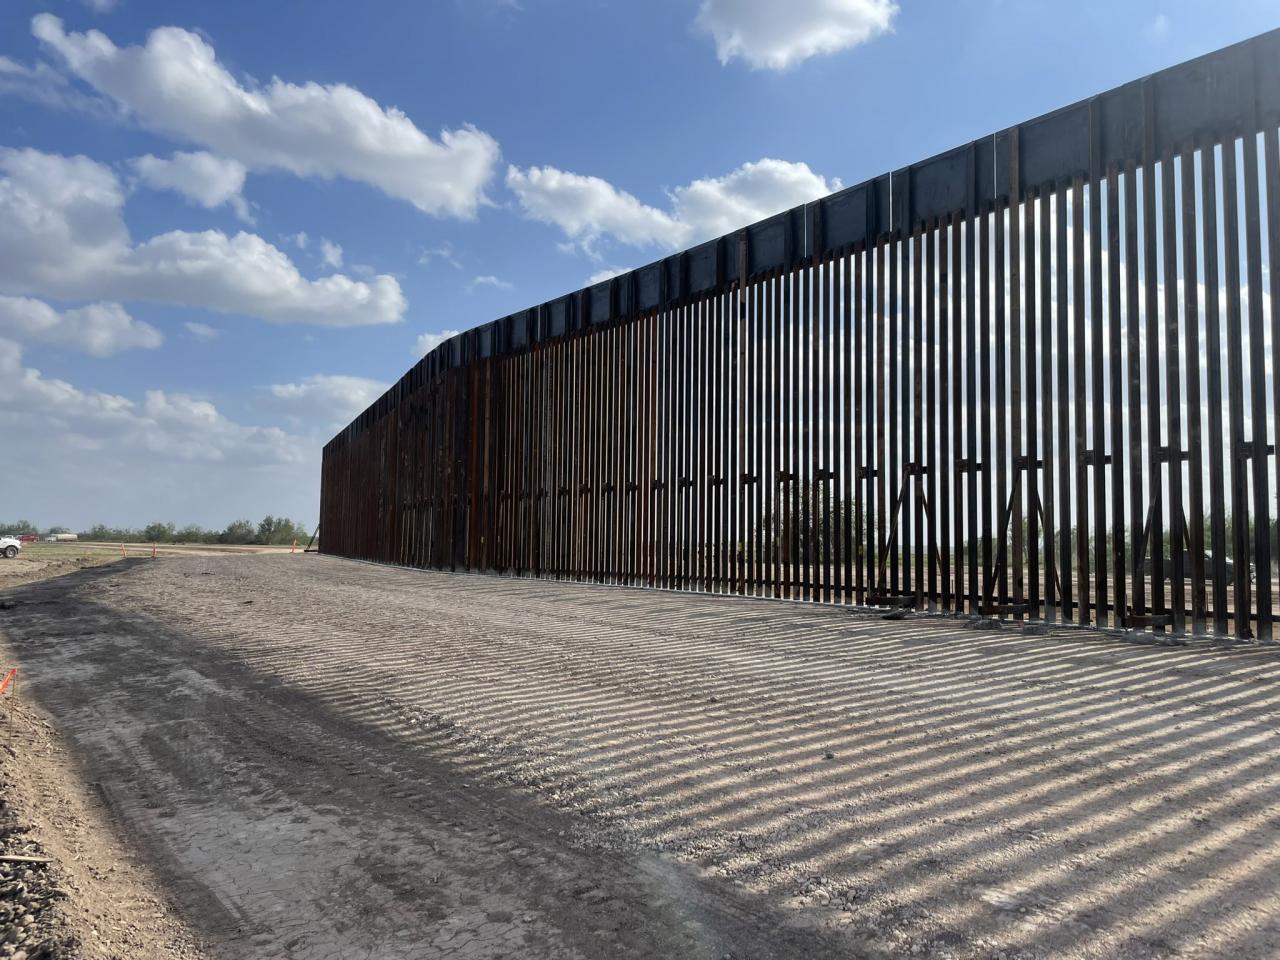 Texas to Resume Construction of Border Wall Initiated by President Trump After Reaching Deals with Private Land Owners